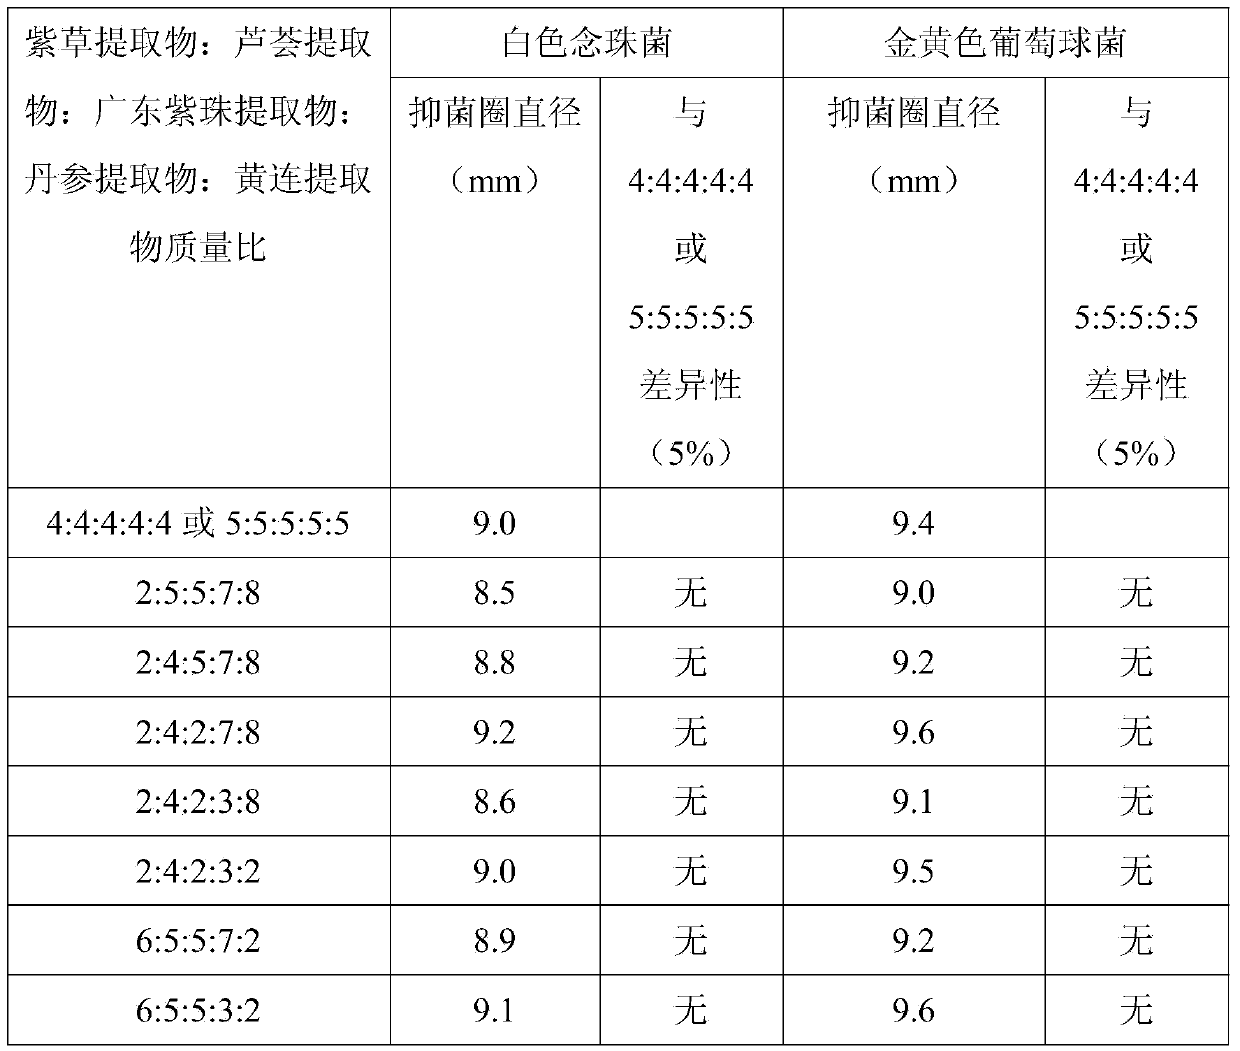 Chinese herbal medicine extract composition for preventing diaper dermatitis and application method of composition